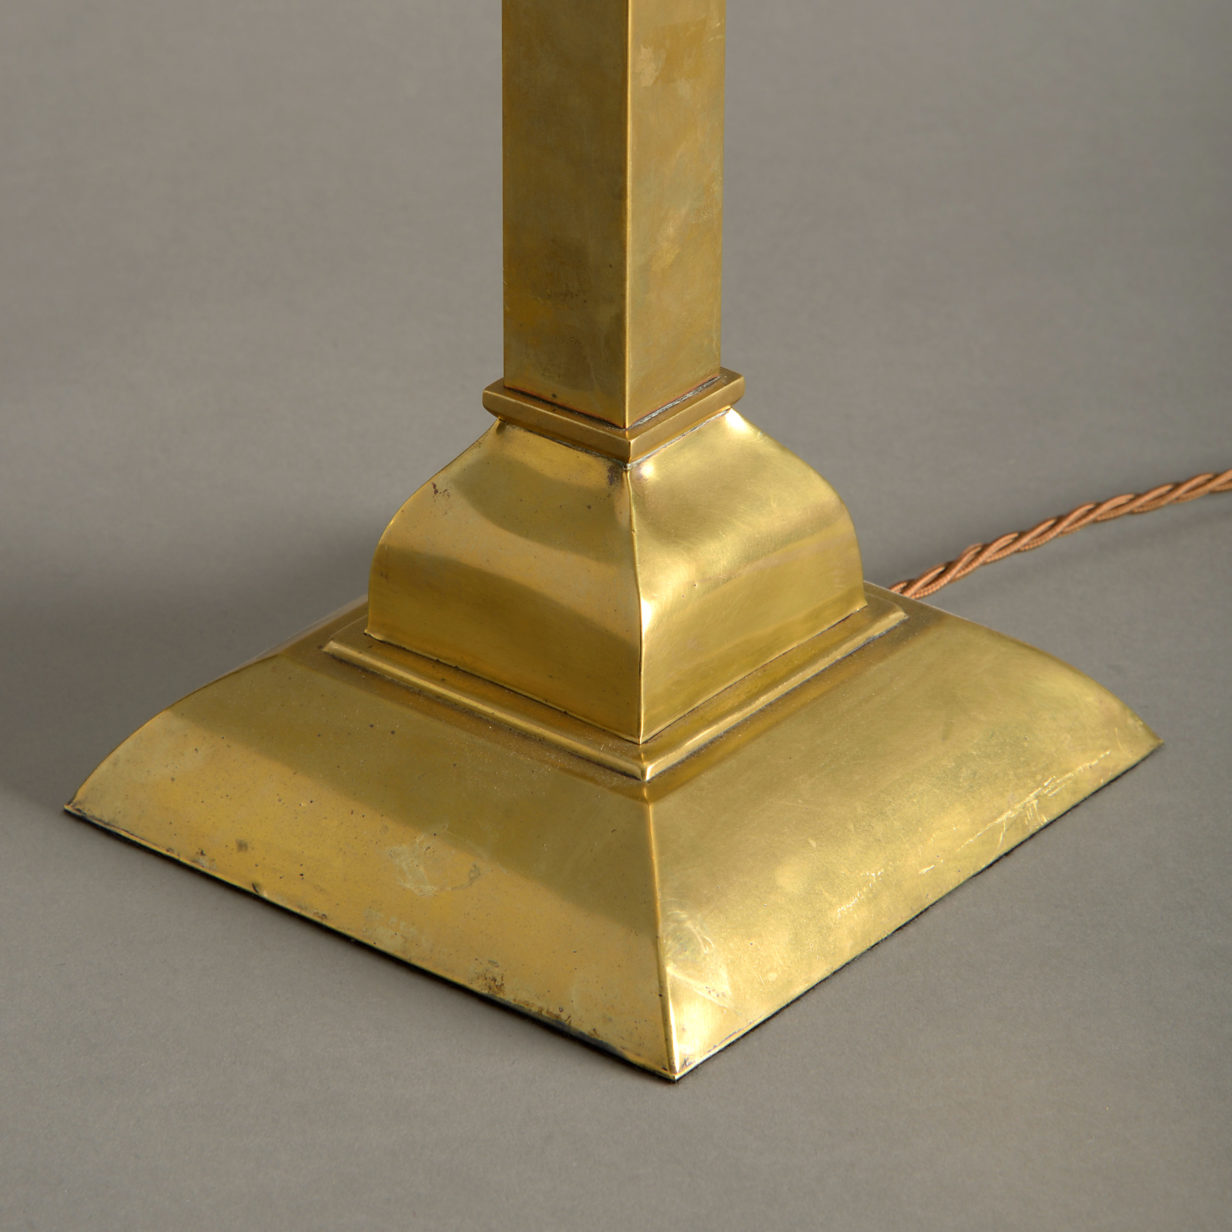 A square brass table lamp